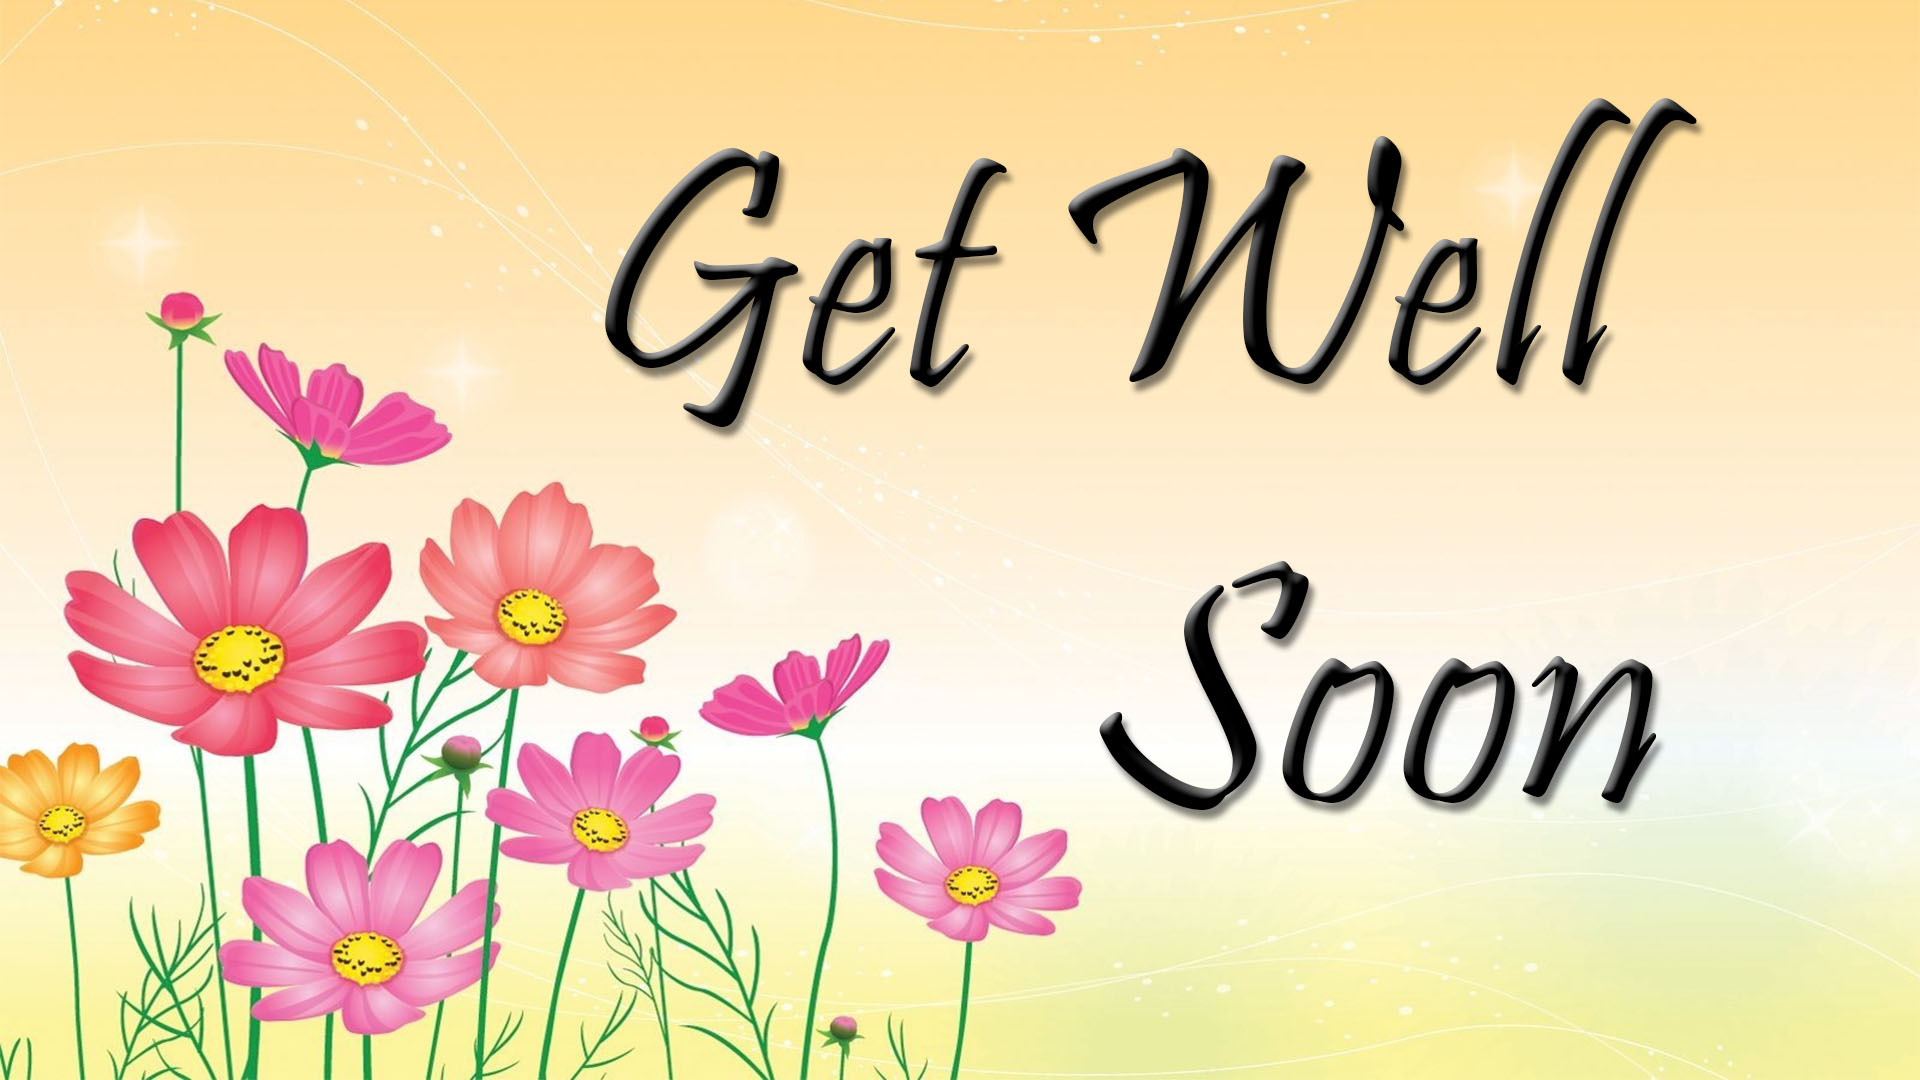 Get better picture. Get well soon Wishes. Открытка get well soon. Get better открытка. Get well картинки.